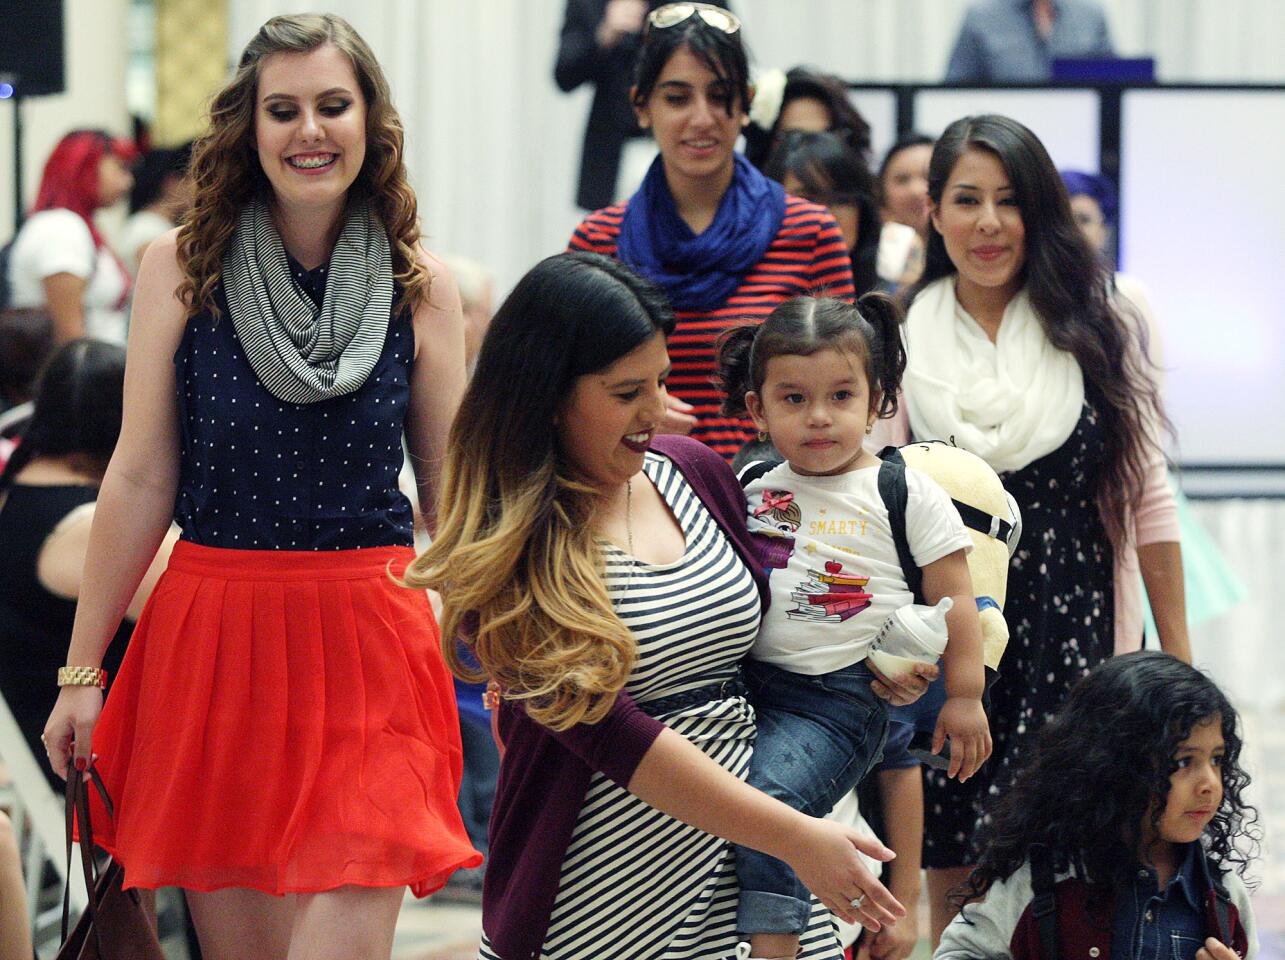 Photo Gallery: Back to School Fashion Show at the Burbank Town Center